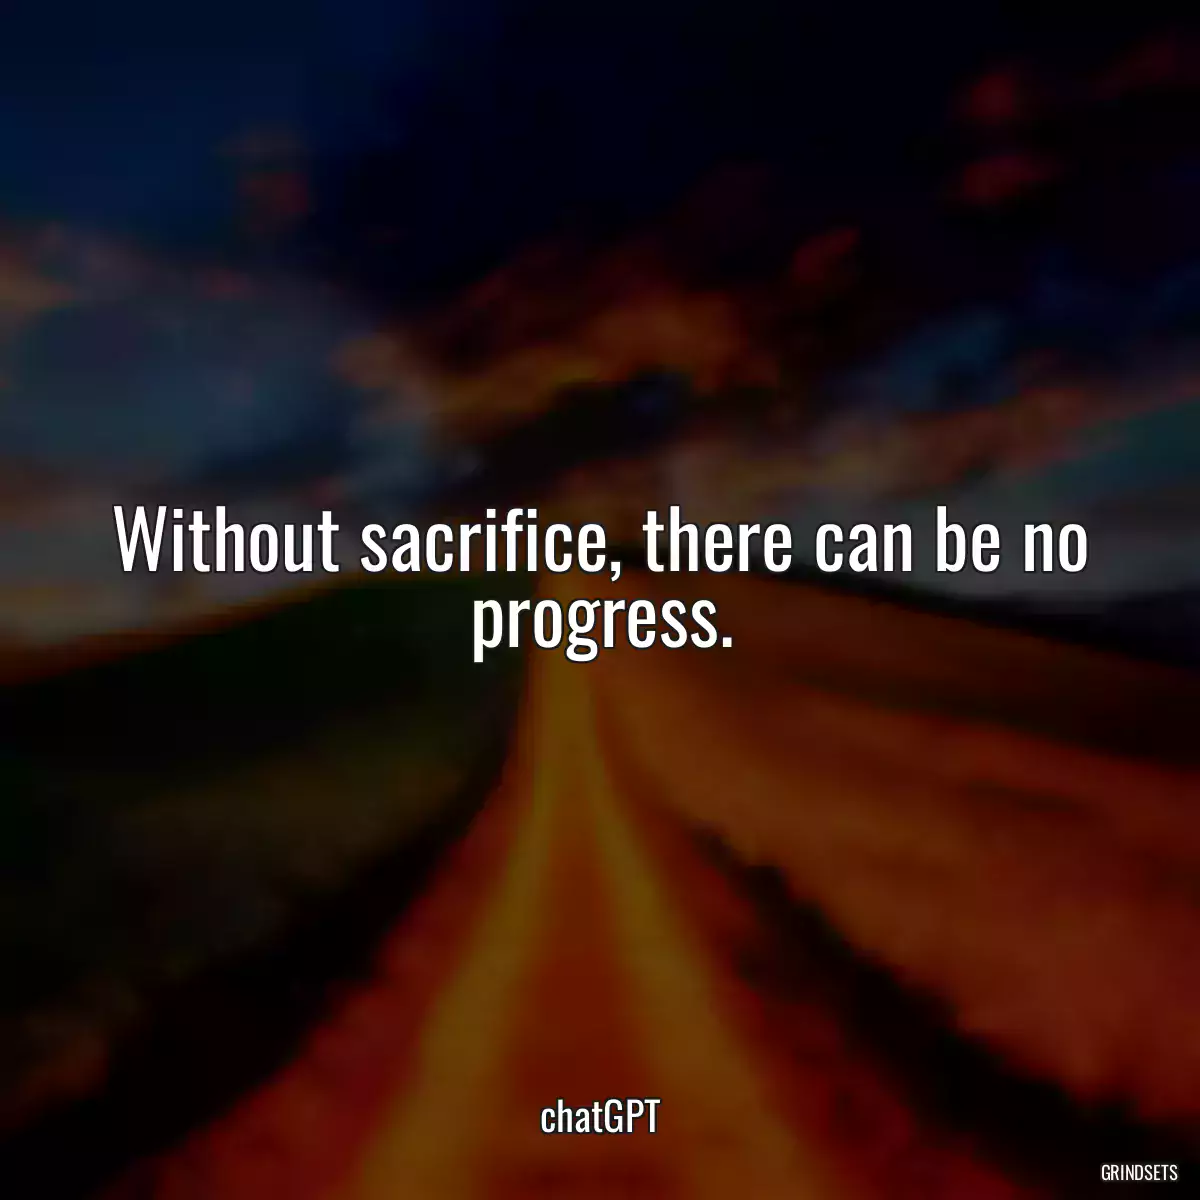 Without sacrifice, there can be no progress.